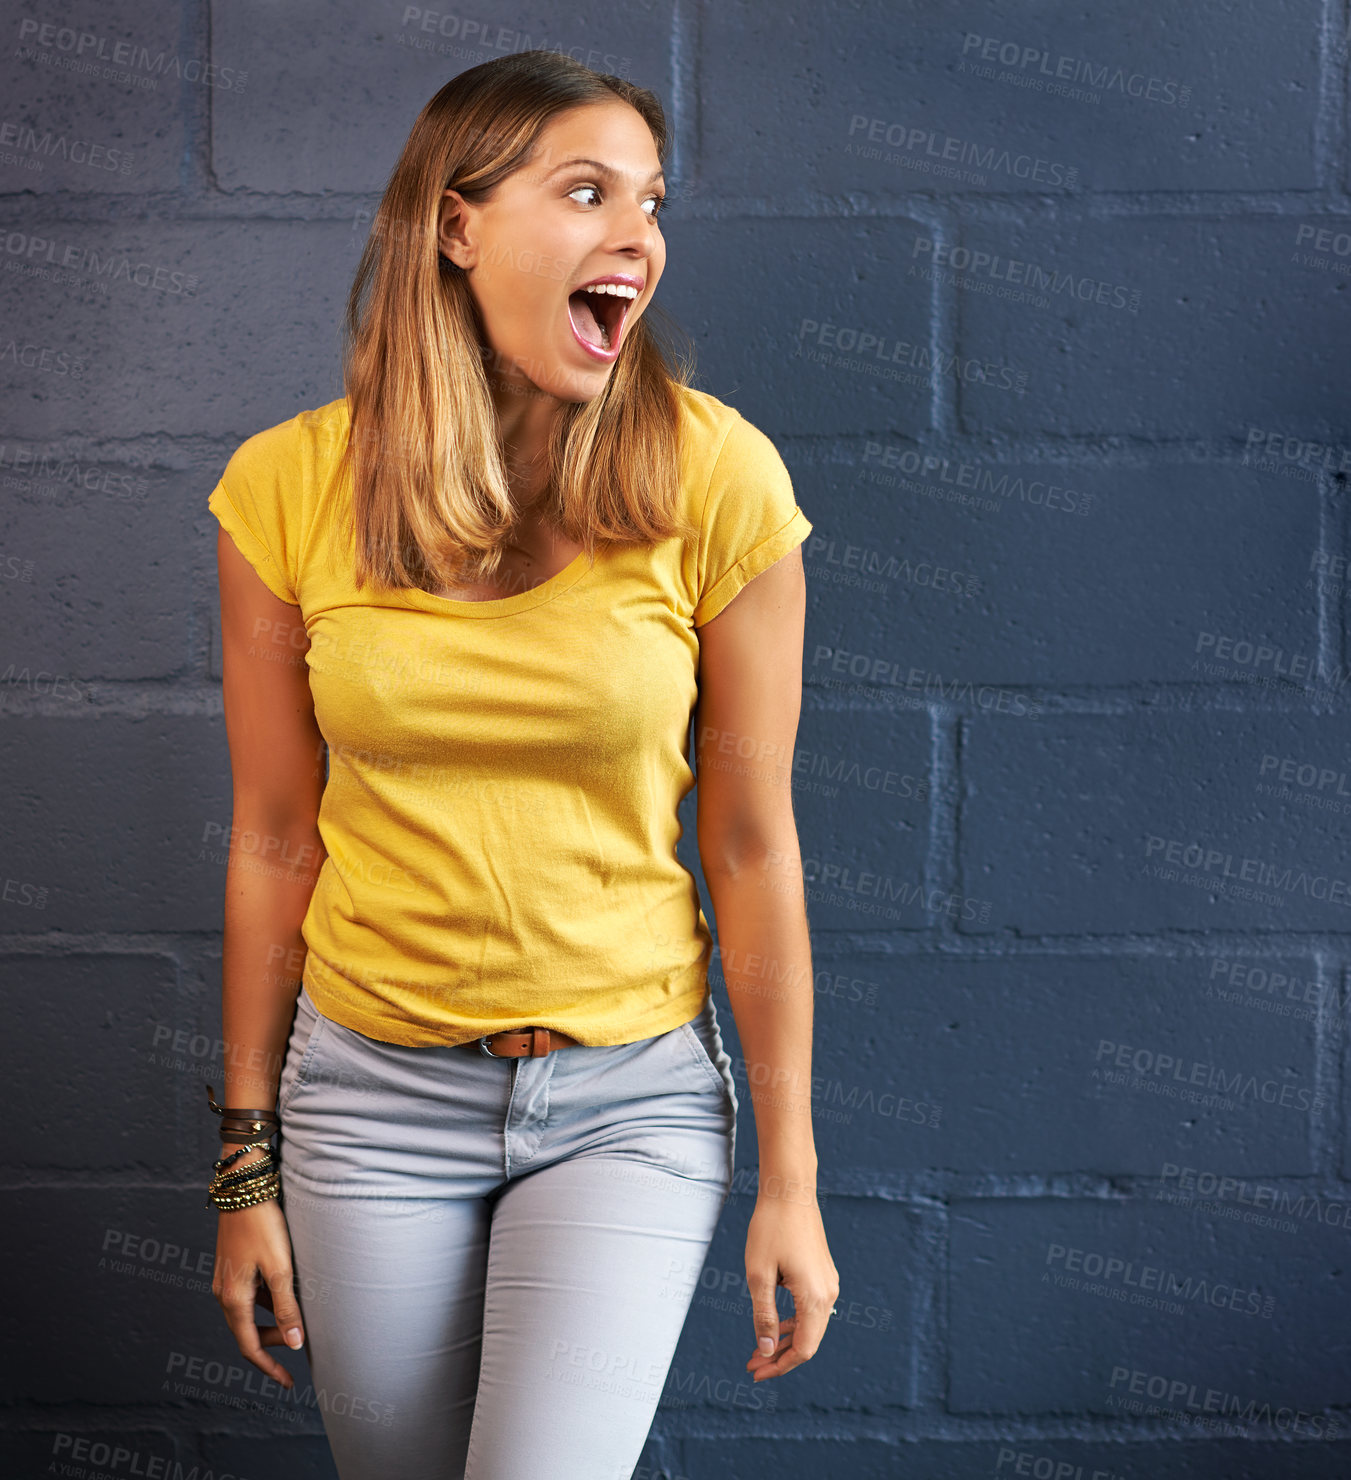 Buy stock photo Shot of a young woman looking amazed against a brick wall background